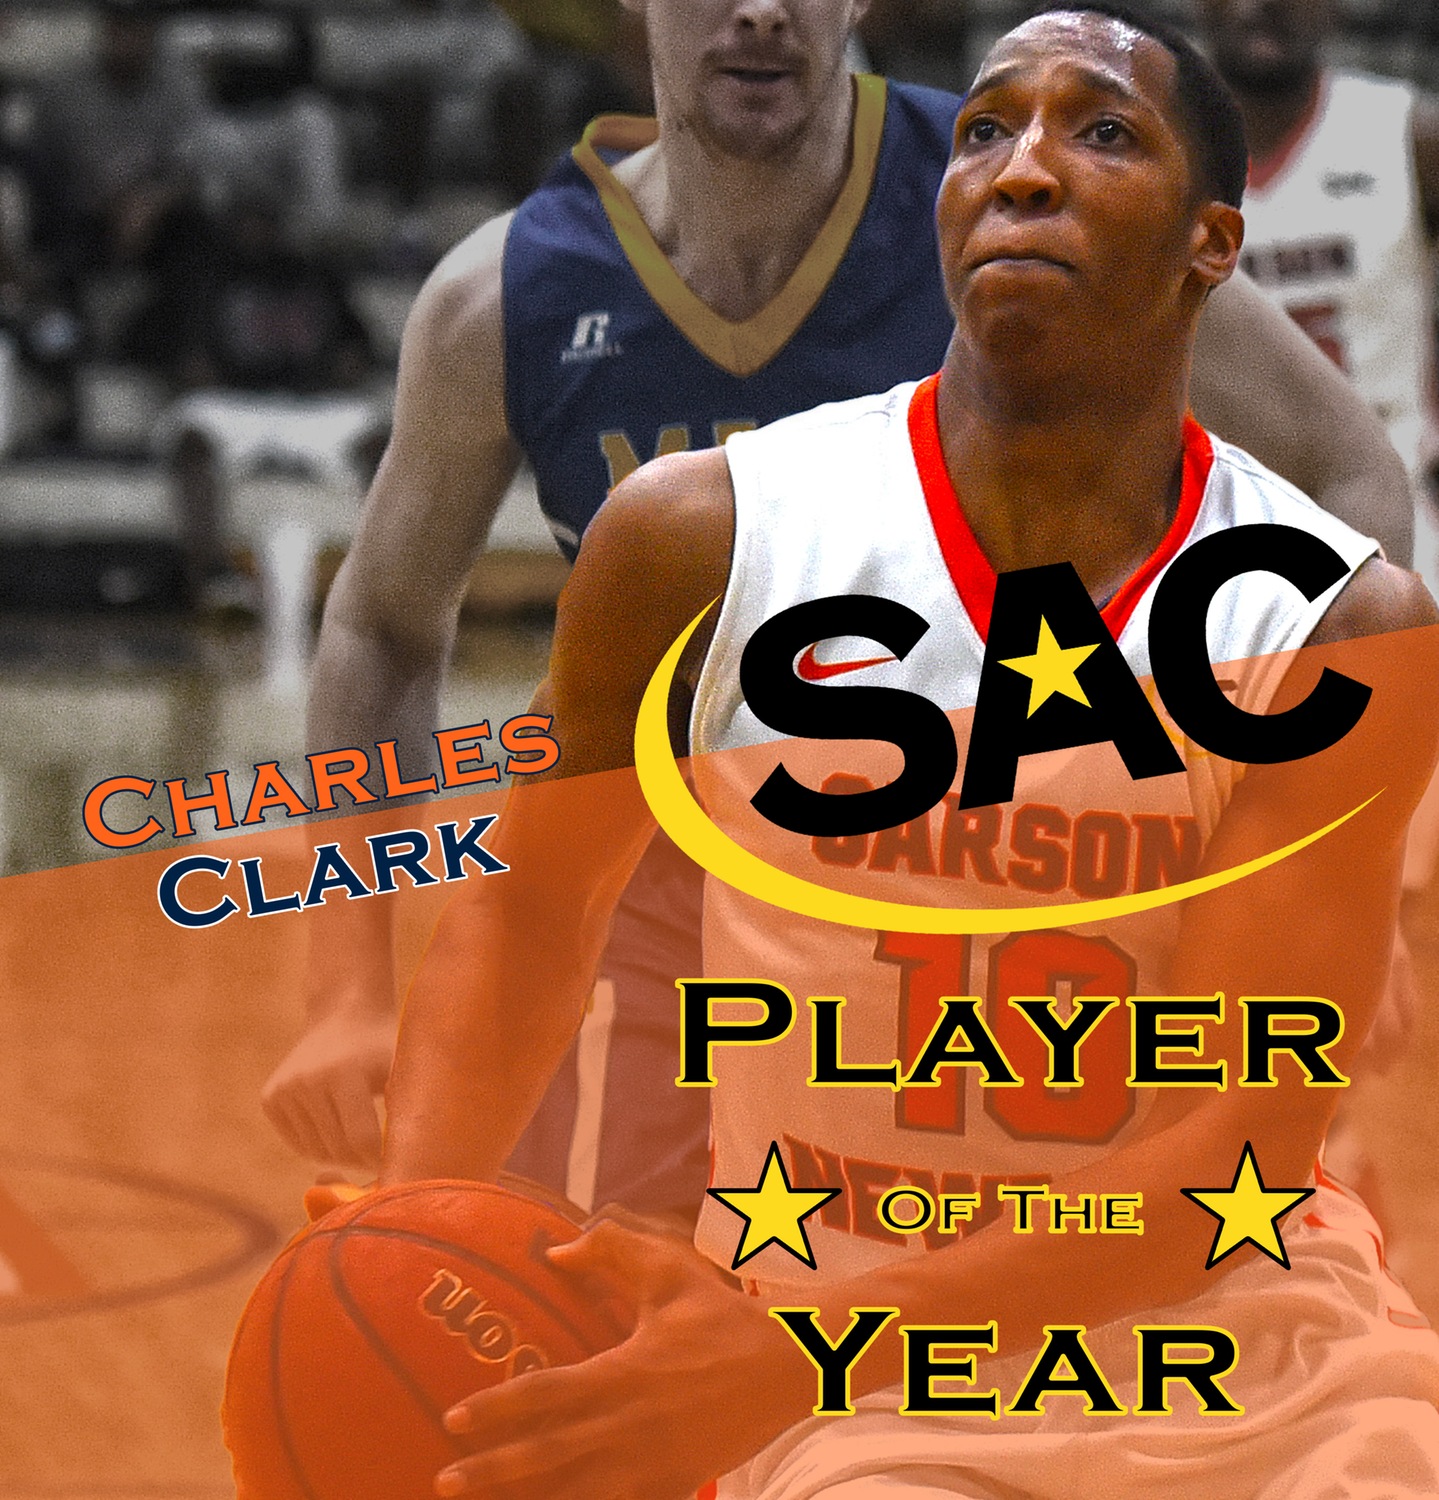 Clark named player of the year, Williams earns All-SAC honors